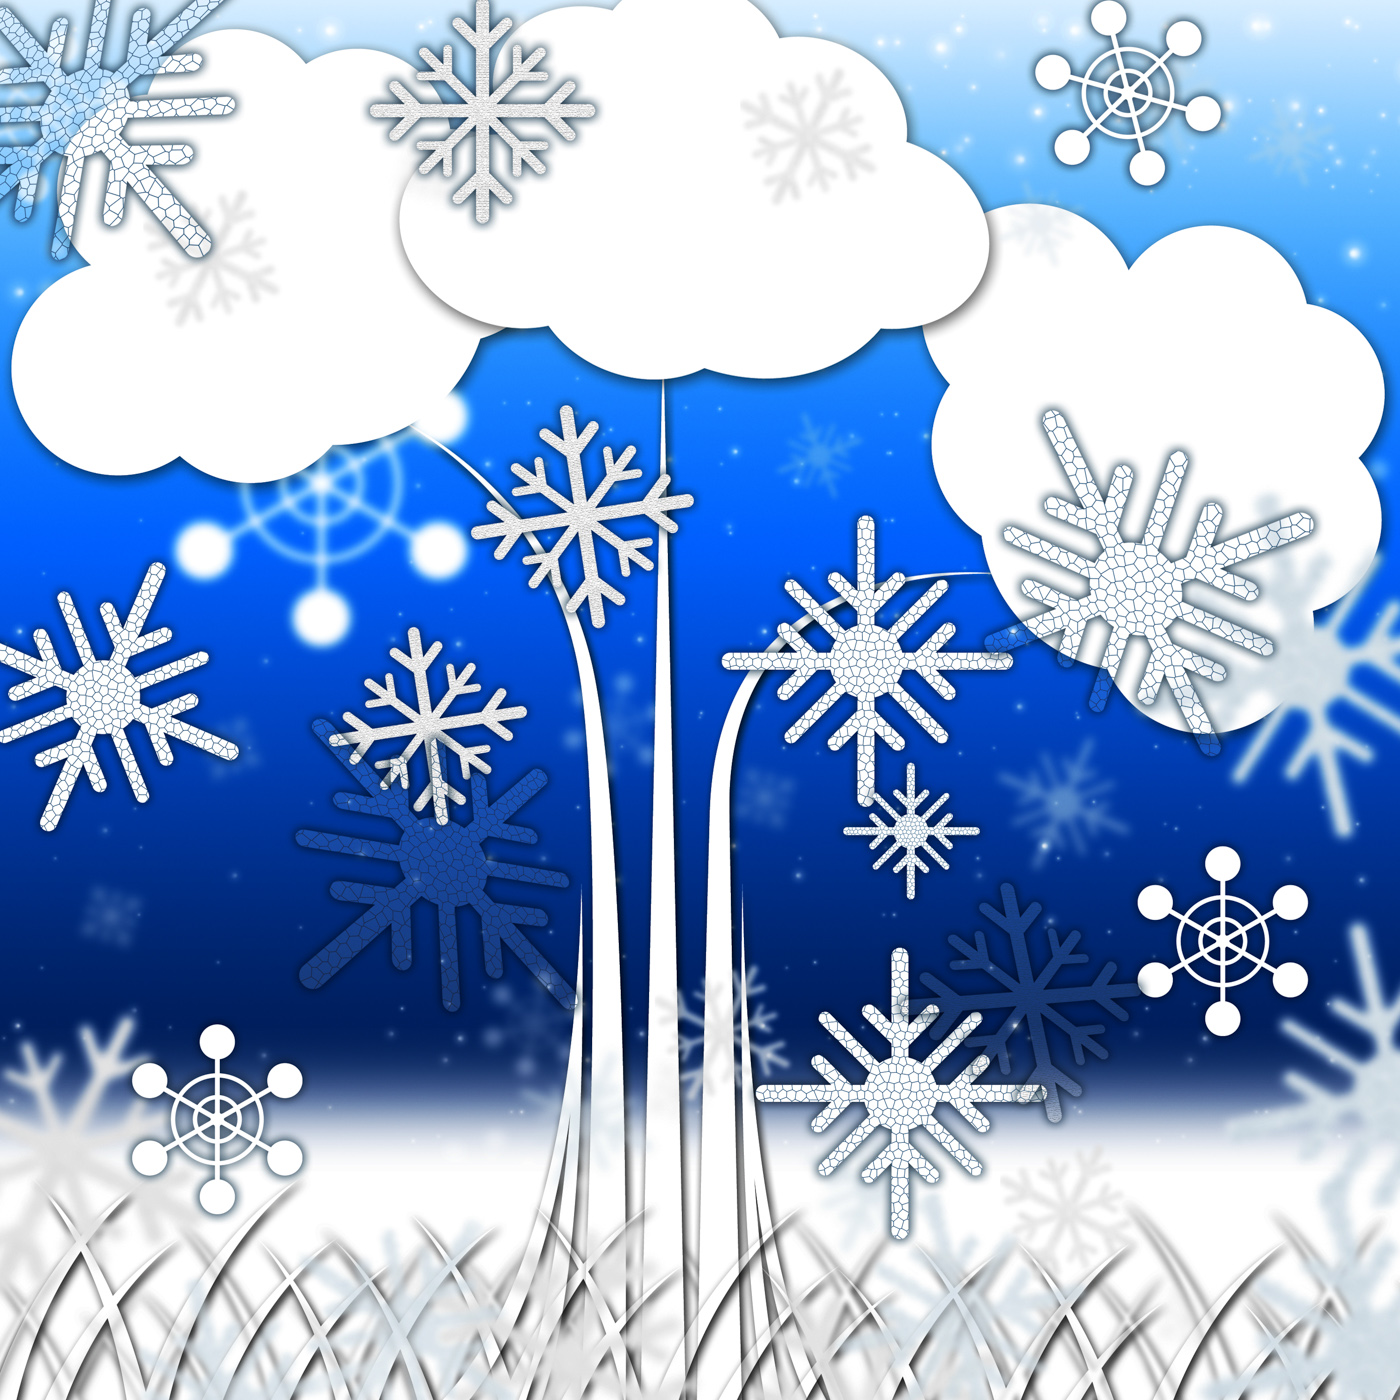 Tree background means branches leaves and snowflakes photo